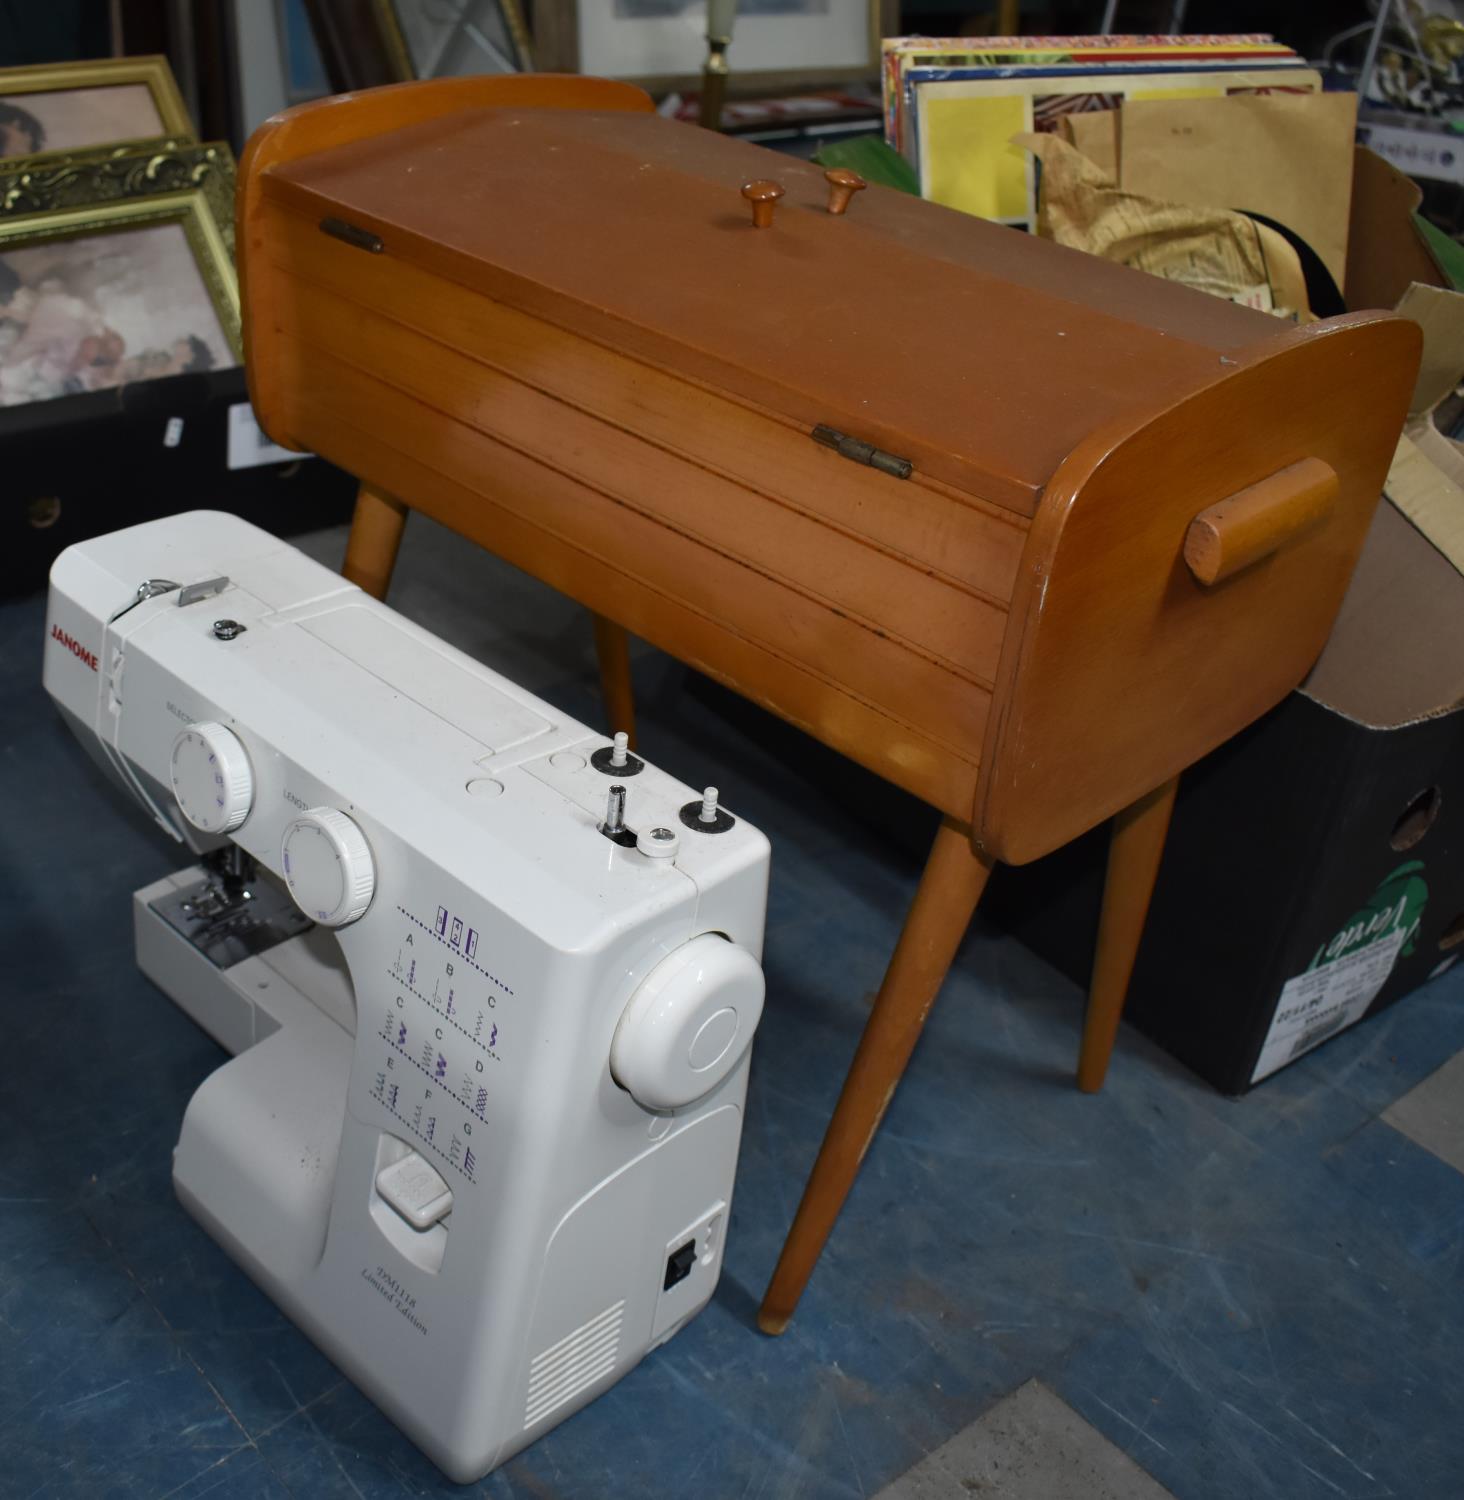 A Mid/Late 20th Century Sewing Box with Contents Together with a Janome Sewing Machine (incomplete) - Image 2 of 2